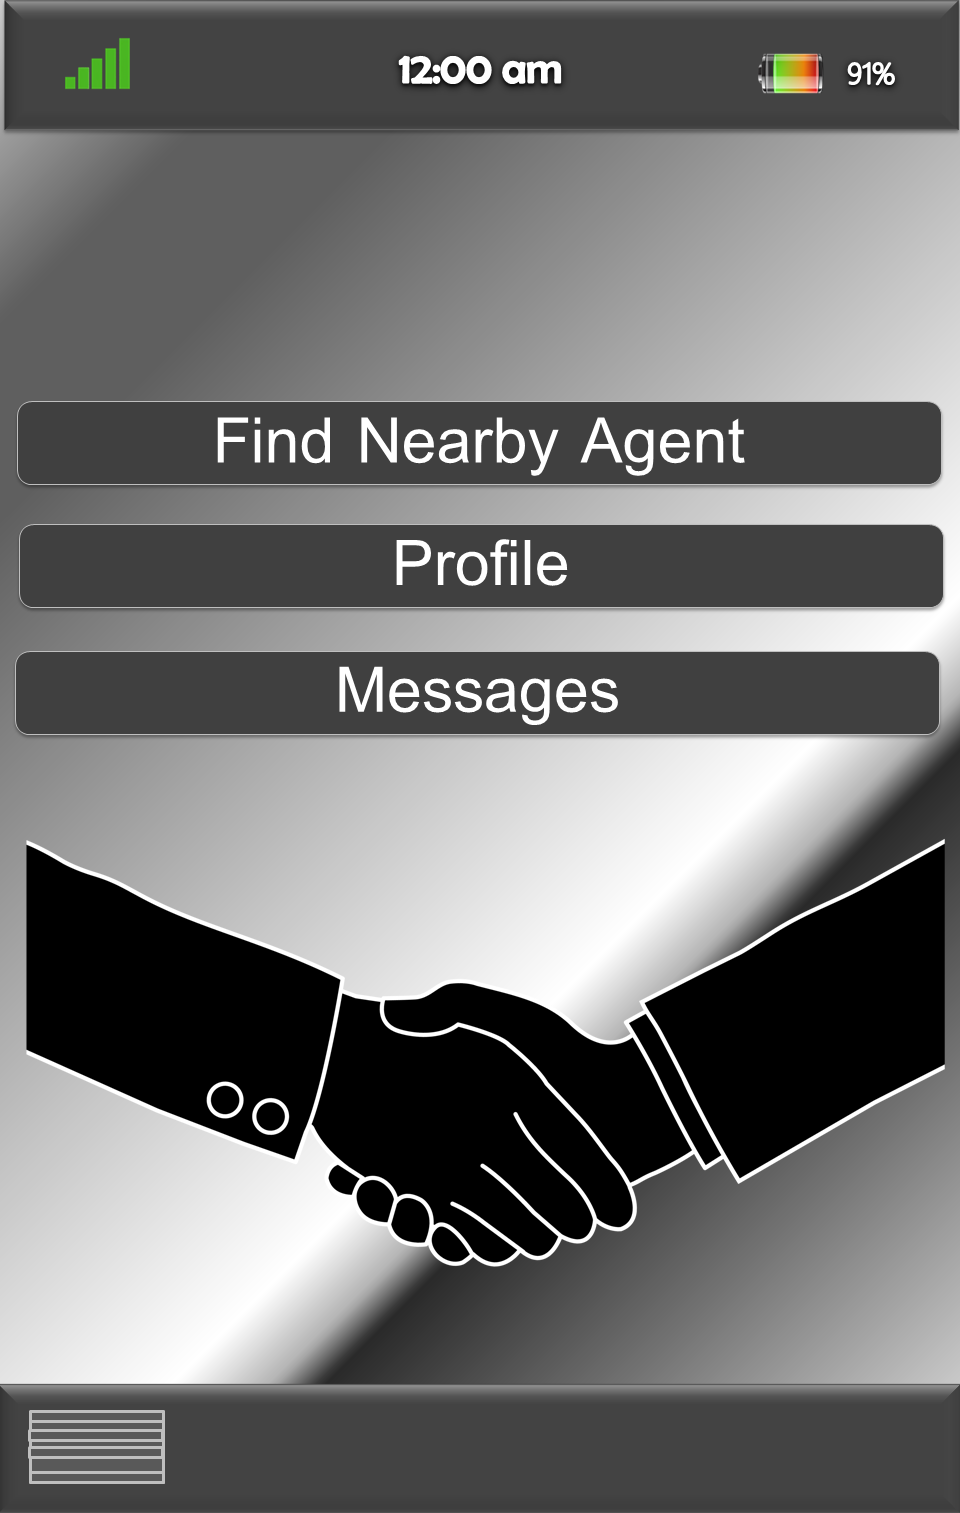 The buyer or seller can get in touch with the agent immediately and get help from them.